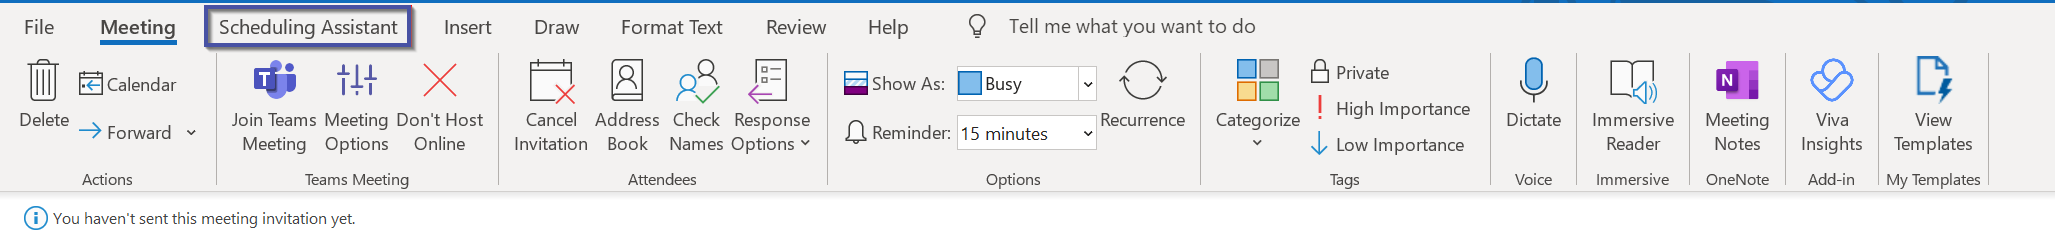 Use the scheduling assistant when booking teams meetings